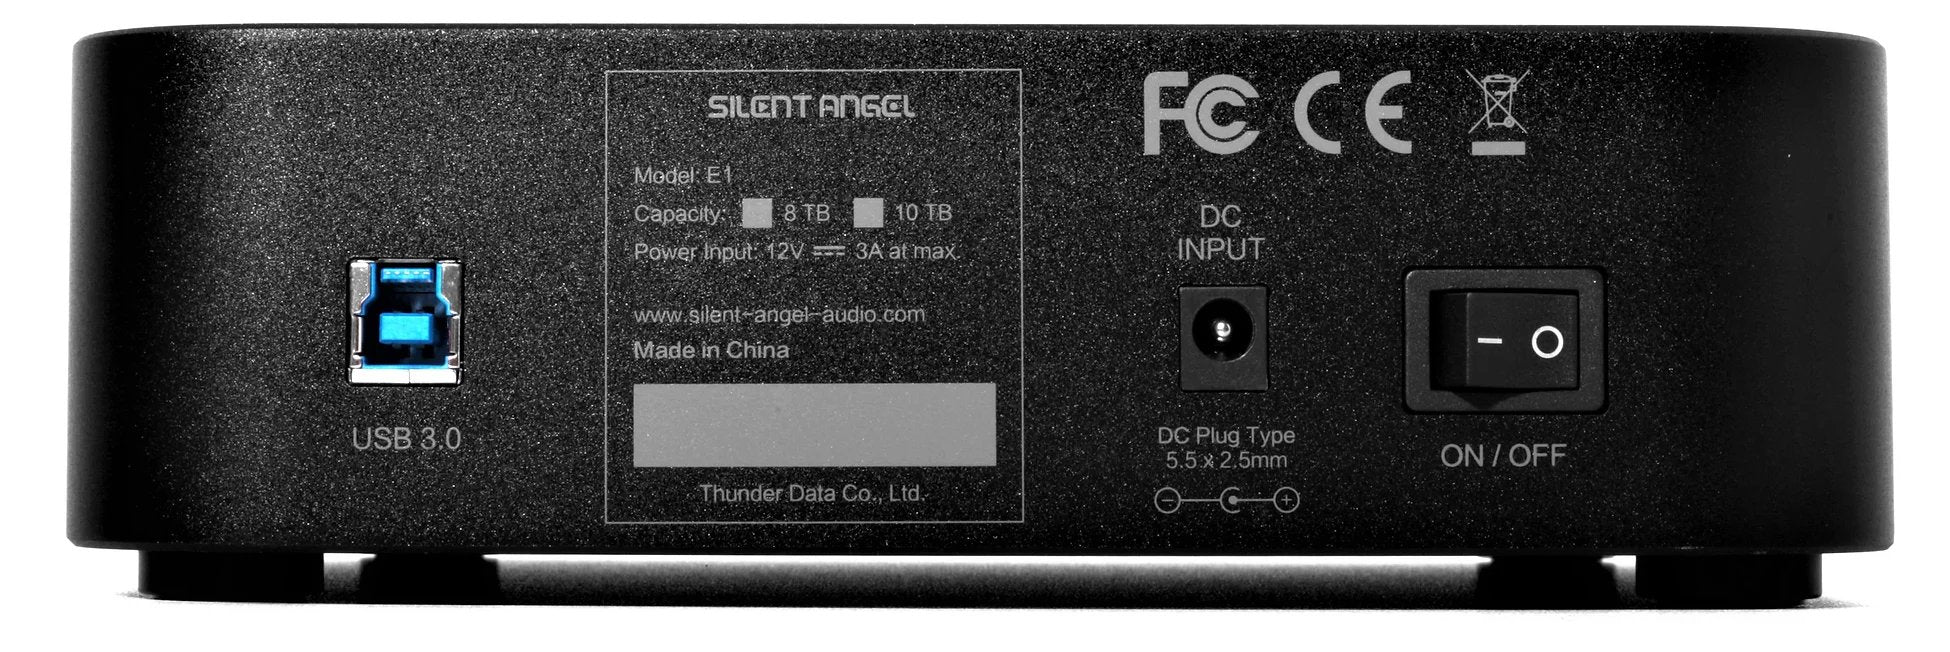 Silent Angel Expander E1 Audiophile Music Storage HDD - The Audio Co.